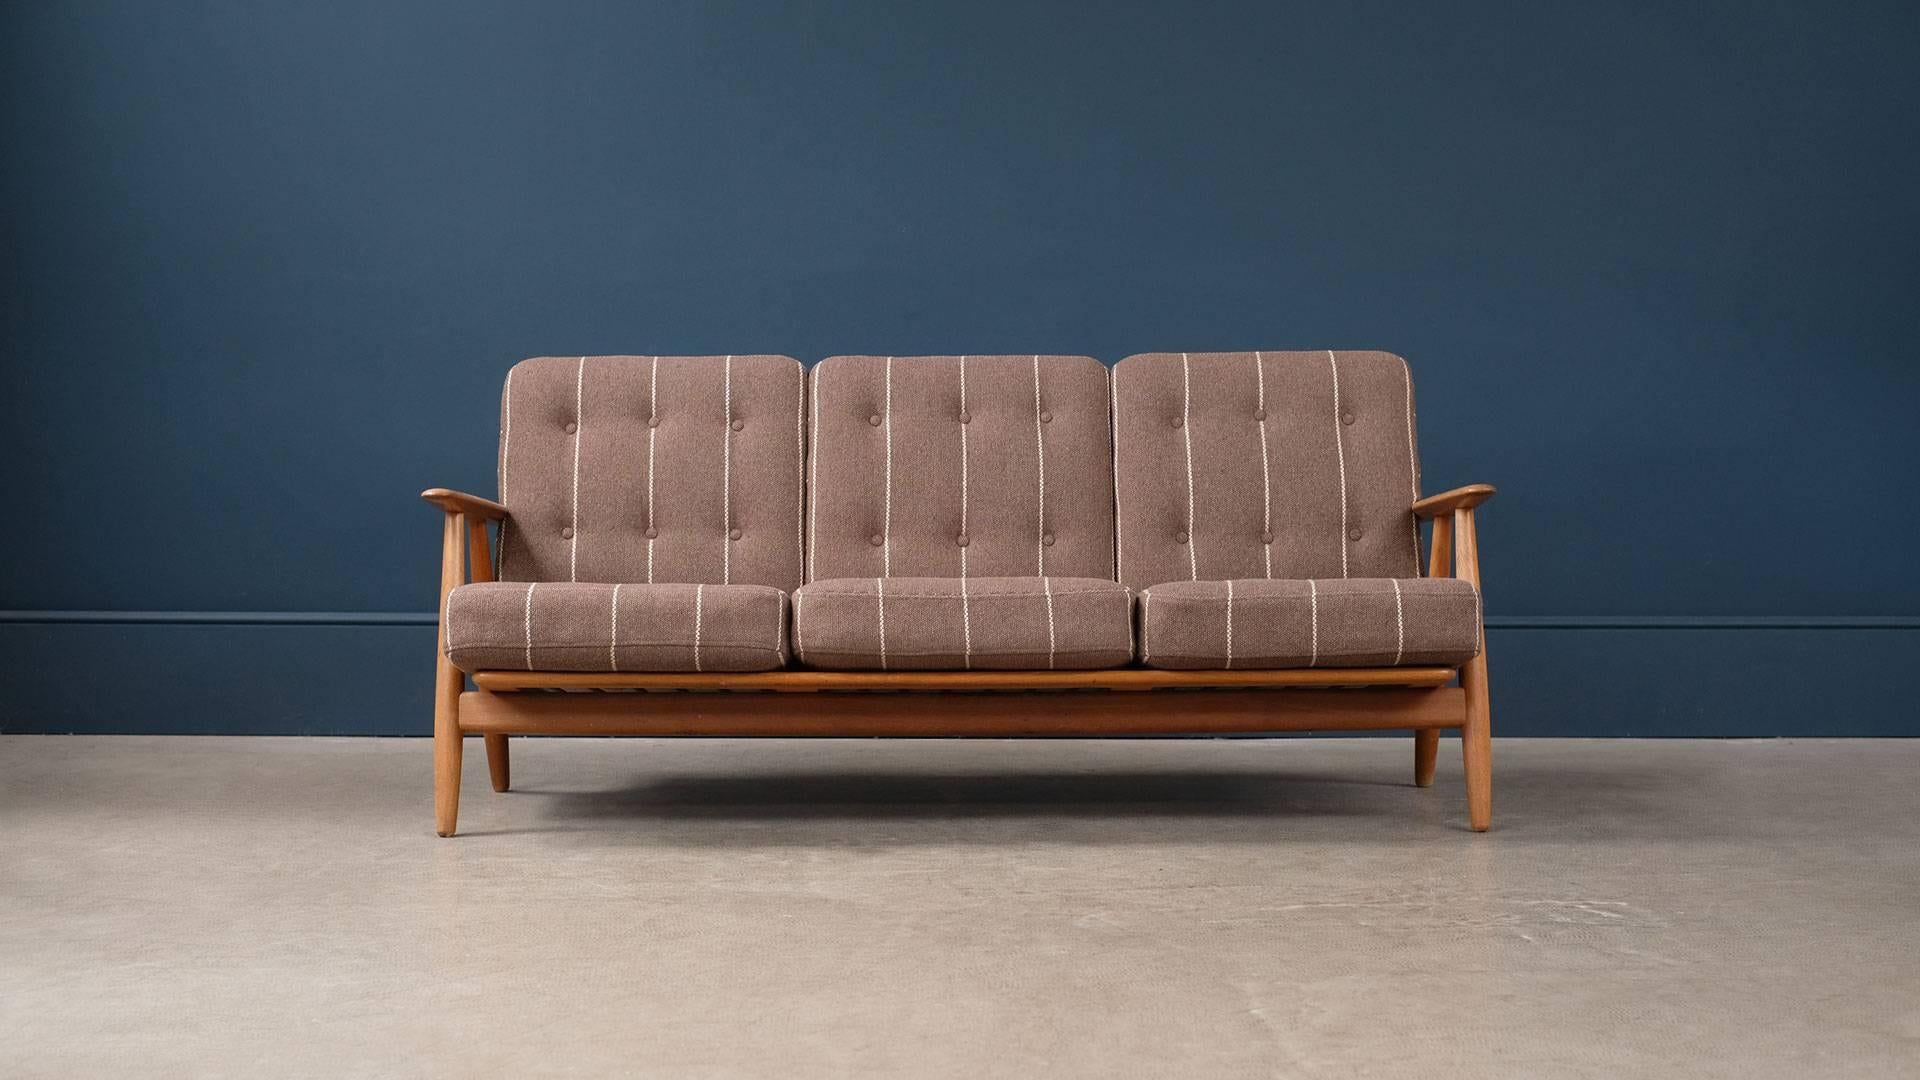 Beautiful GE240 cigar sofa in solid oak designed by Hans Wegner for GETAMA, Denmark. Great example in solid oak with staggering grain pattern to the arms. Original internally sprung cushions with beautiful striped fabric. New fabric options also